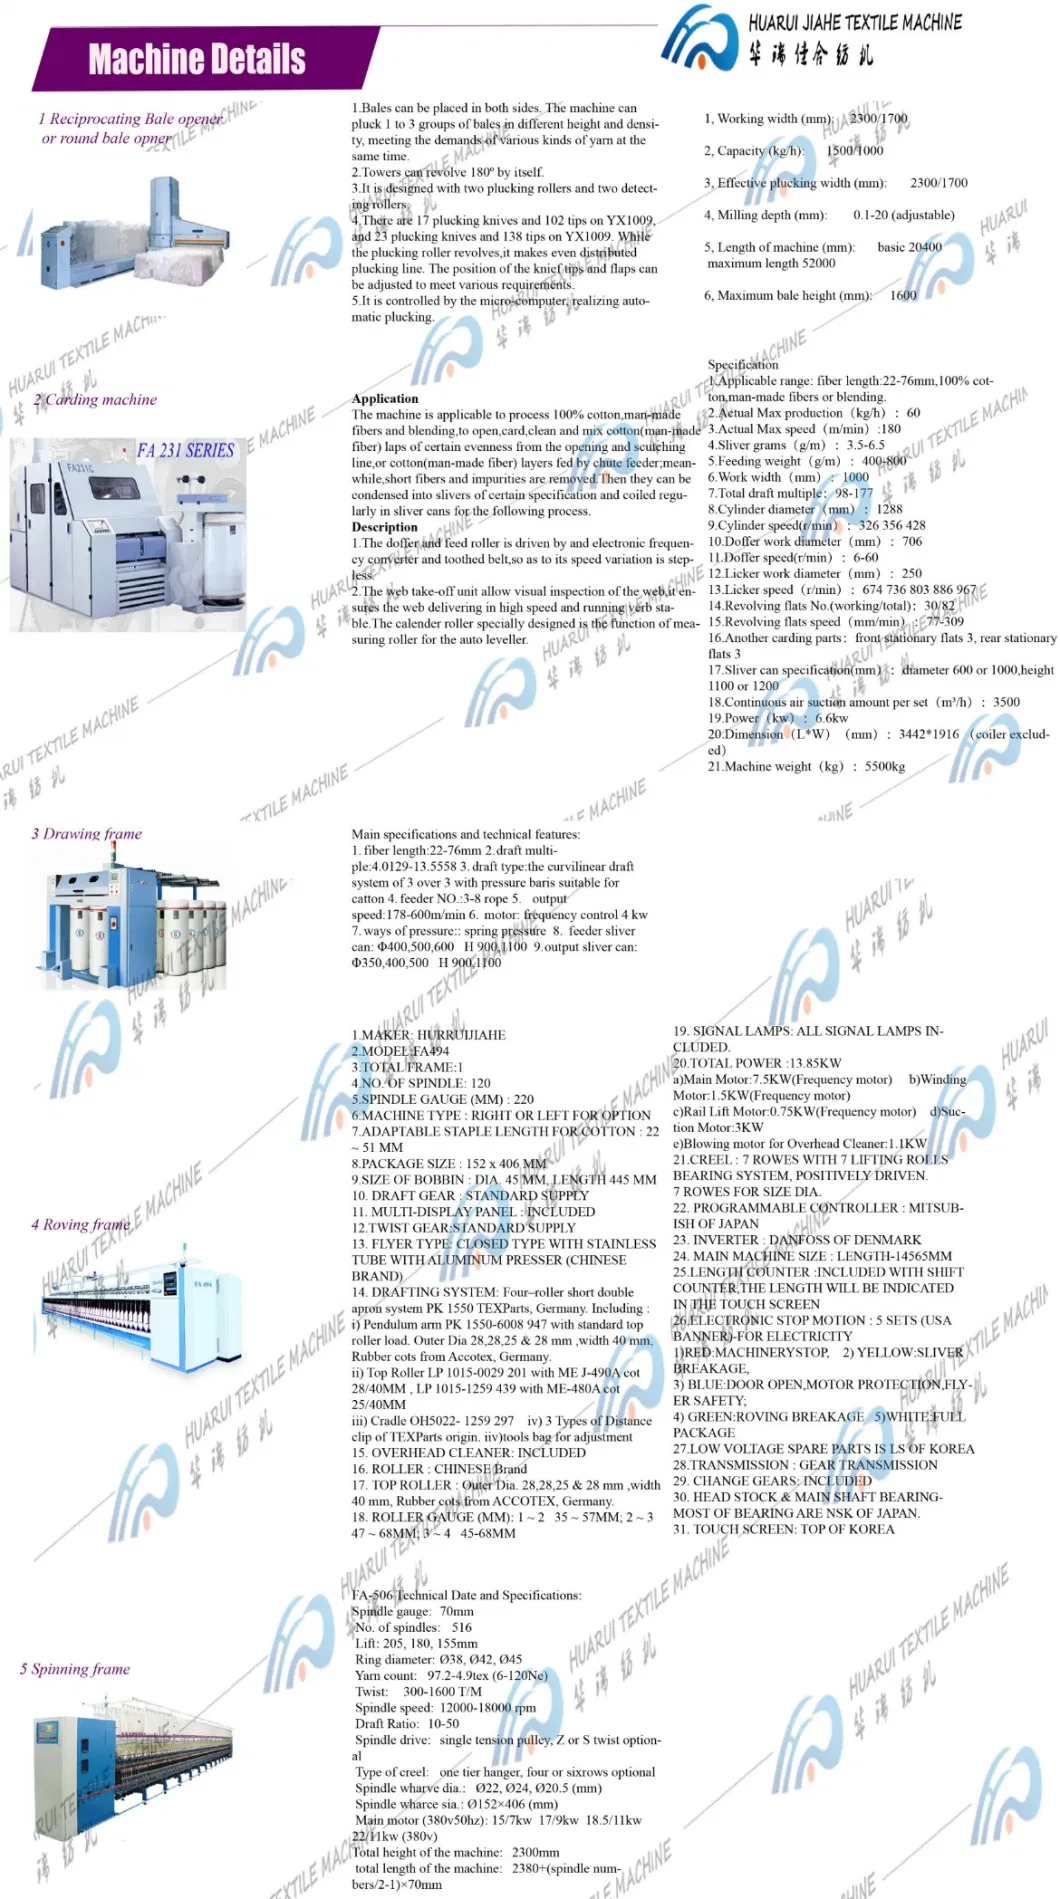 Professional Garment Dyeing Machine Industrial Small Fabric Dyeing Machine Underwear Garment Dyeing Machine with Paddle Widely Used: for Wool Sweater, Clothing